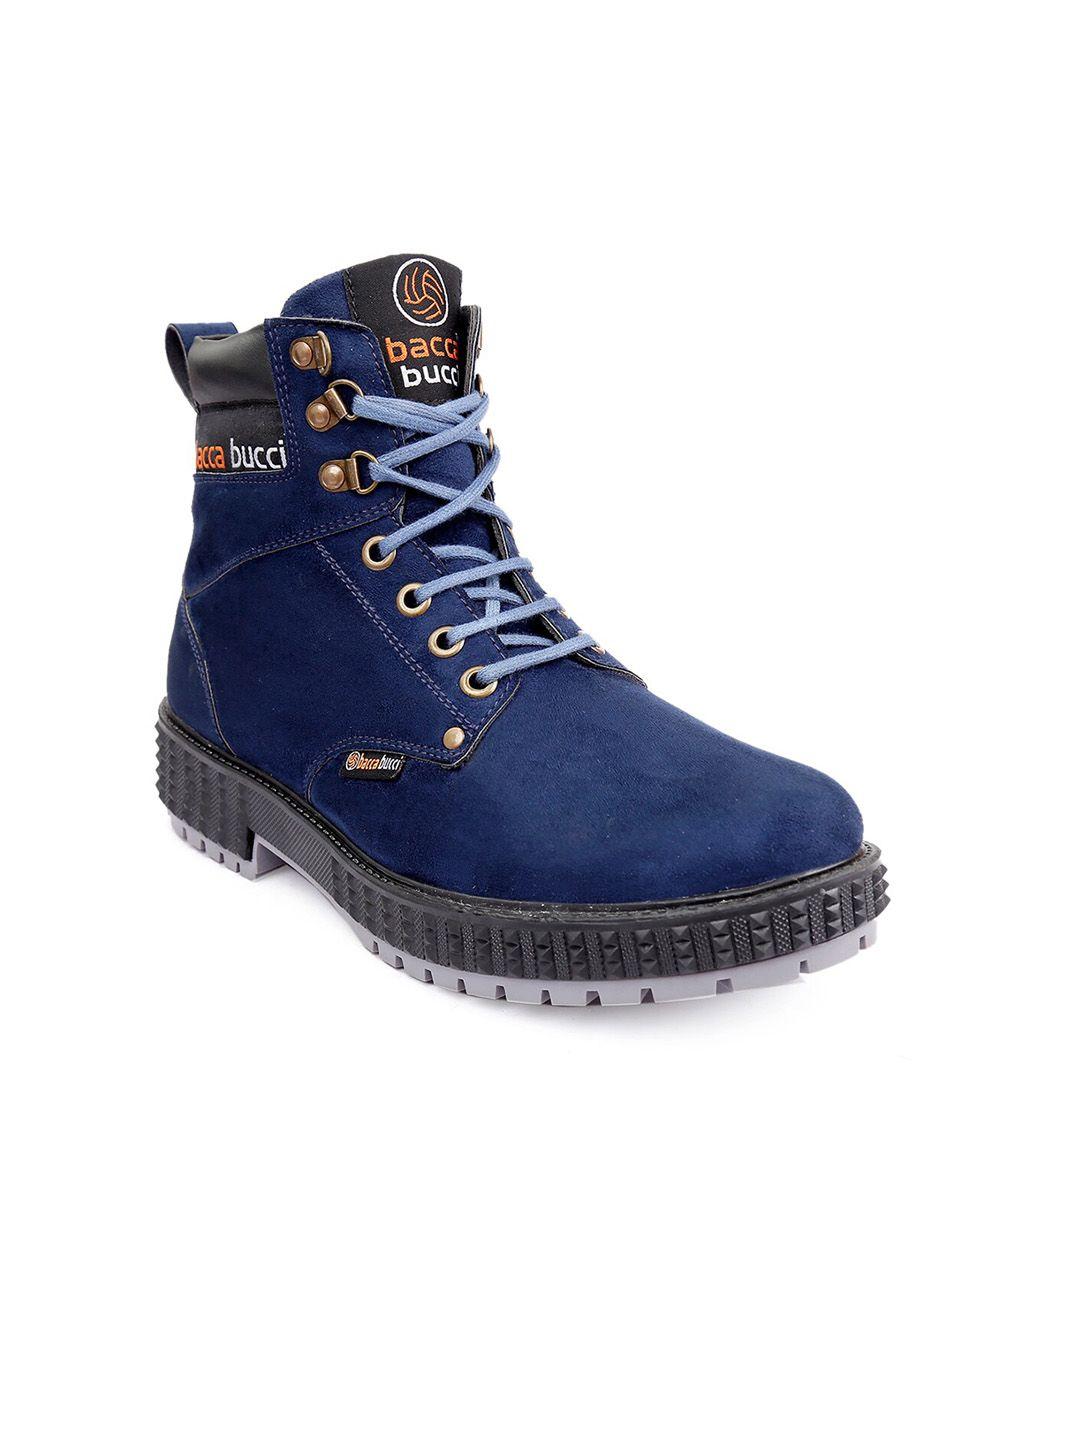 bacca bucci men textured casual hiking boots